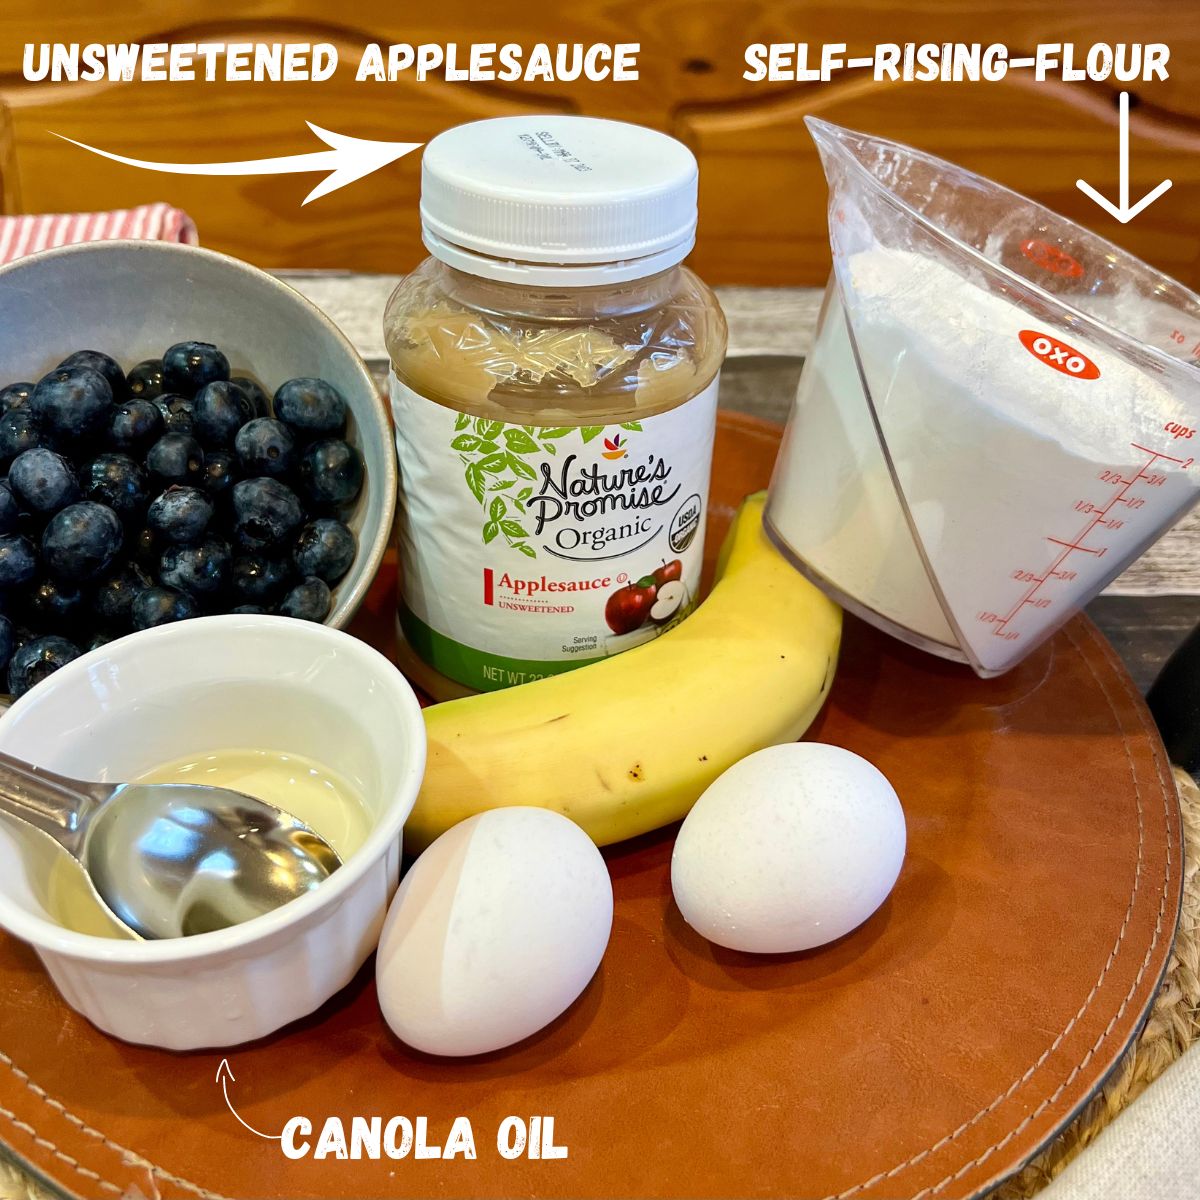 A bowl of blueberries, a jar of applesauce, a measuring cup filled with self-rising flour, a banana, 2 eggs and a bowl of canola oil